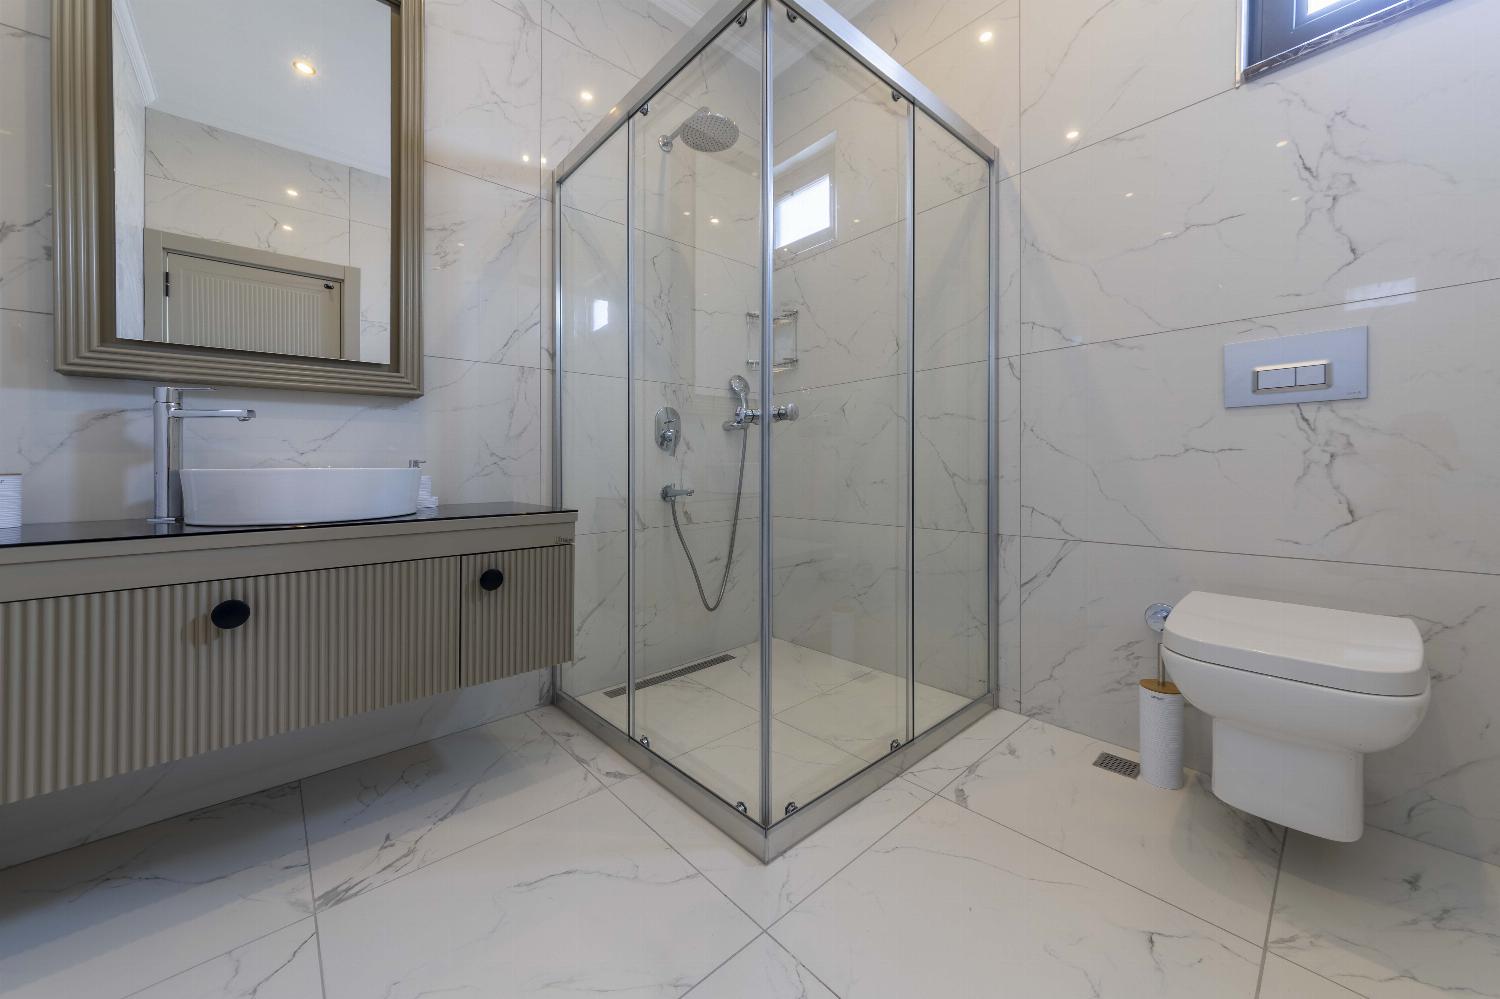  Ensuite bathroom with shower